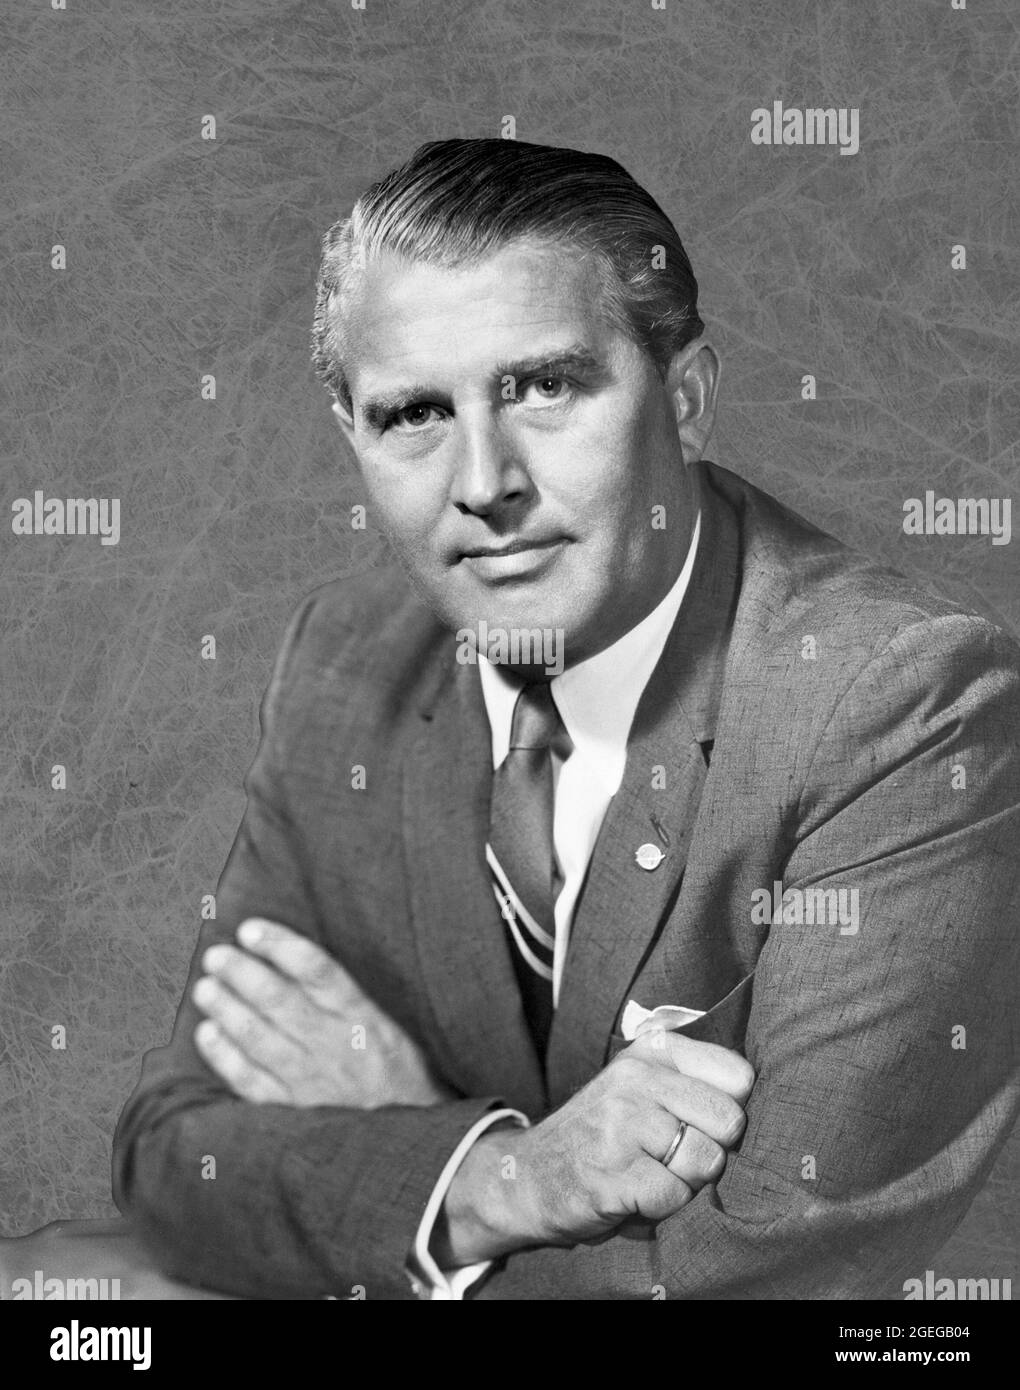 Dr. Wernher von Braun served as Marshall Space Flight Center's first director from July 1, 1960 until January 27, 1970, when he was appointed NASA Deputy Associate Administrator for Plarning. Following World War II, Dr. von Braun and his German colleagues arrived in the United States under Project Paperclip to continue their rocket development work. In 1950, von Braun and his rocket team were transferred from Ft. Bliss, Texas to Huntsville, Alabama to work for the Army's rocket program at Redstone Arsenal and later, NASA's Marshall Space Flight Center. Under von Braun's leadership, Marshall de Stock Photo